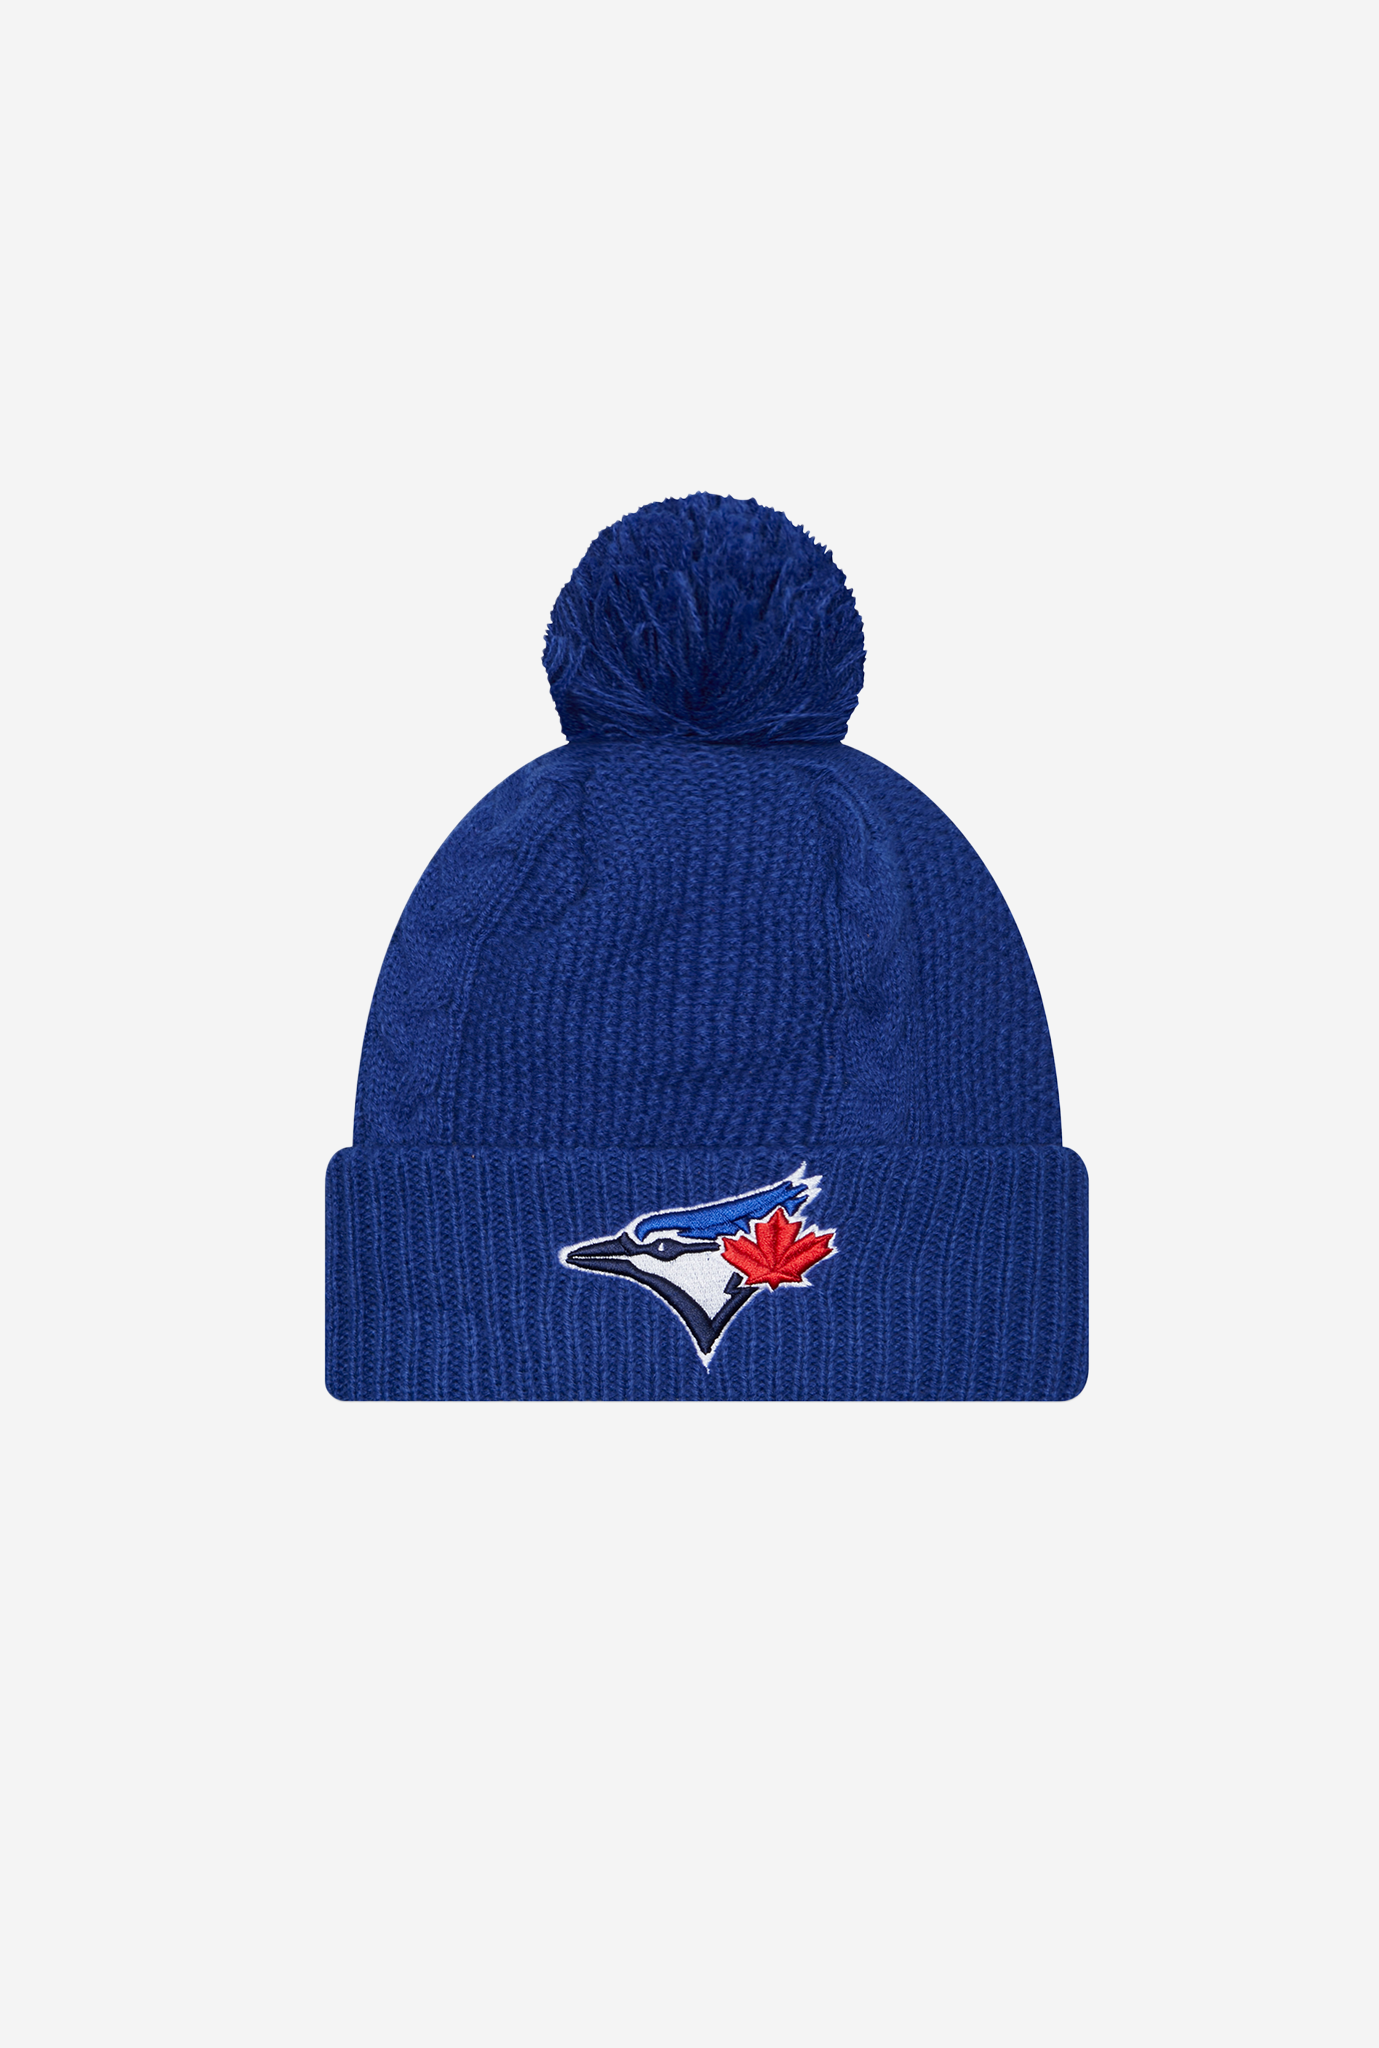 Toronto Blue Jays E3 Cabled Cuffed Knit